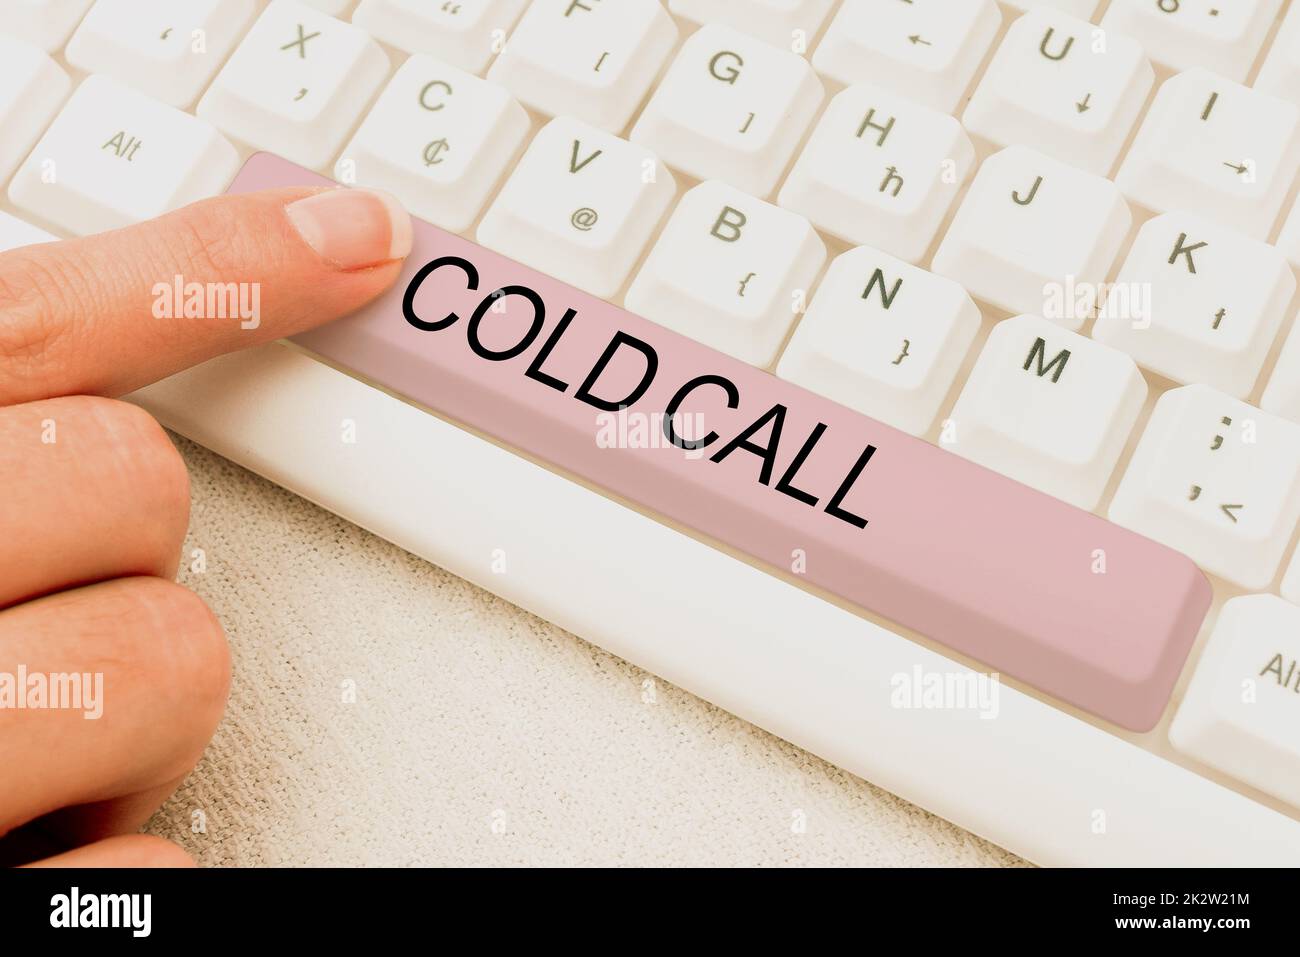 Sign displaying Cold Call. Business concept Unsolicited call made by someone trying to sell goods or services -49119 Stock Photo